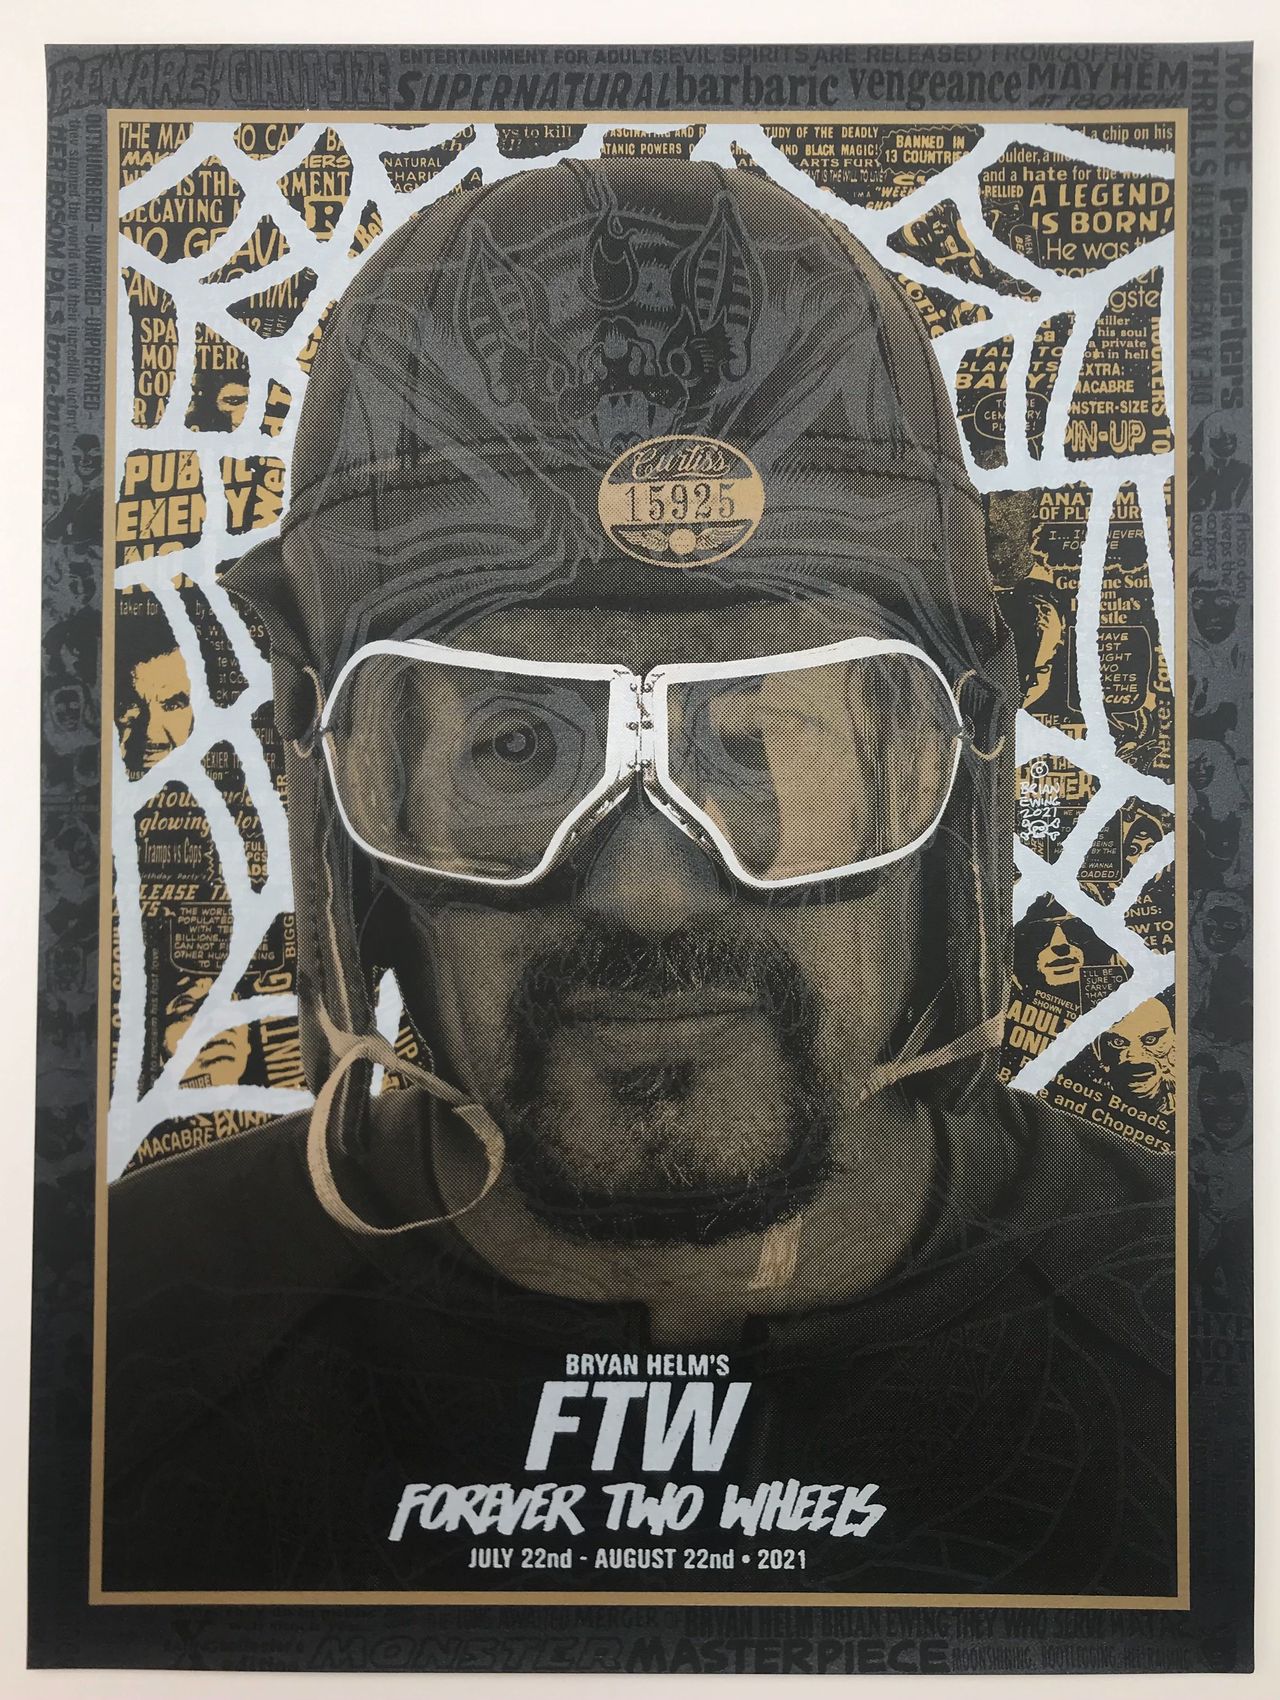 FTW Exhibit Poster Billy Lane by Bryan Helm, Illustration by Brian Ewing